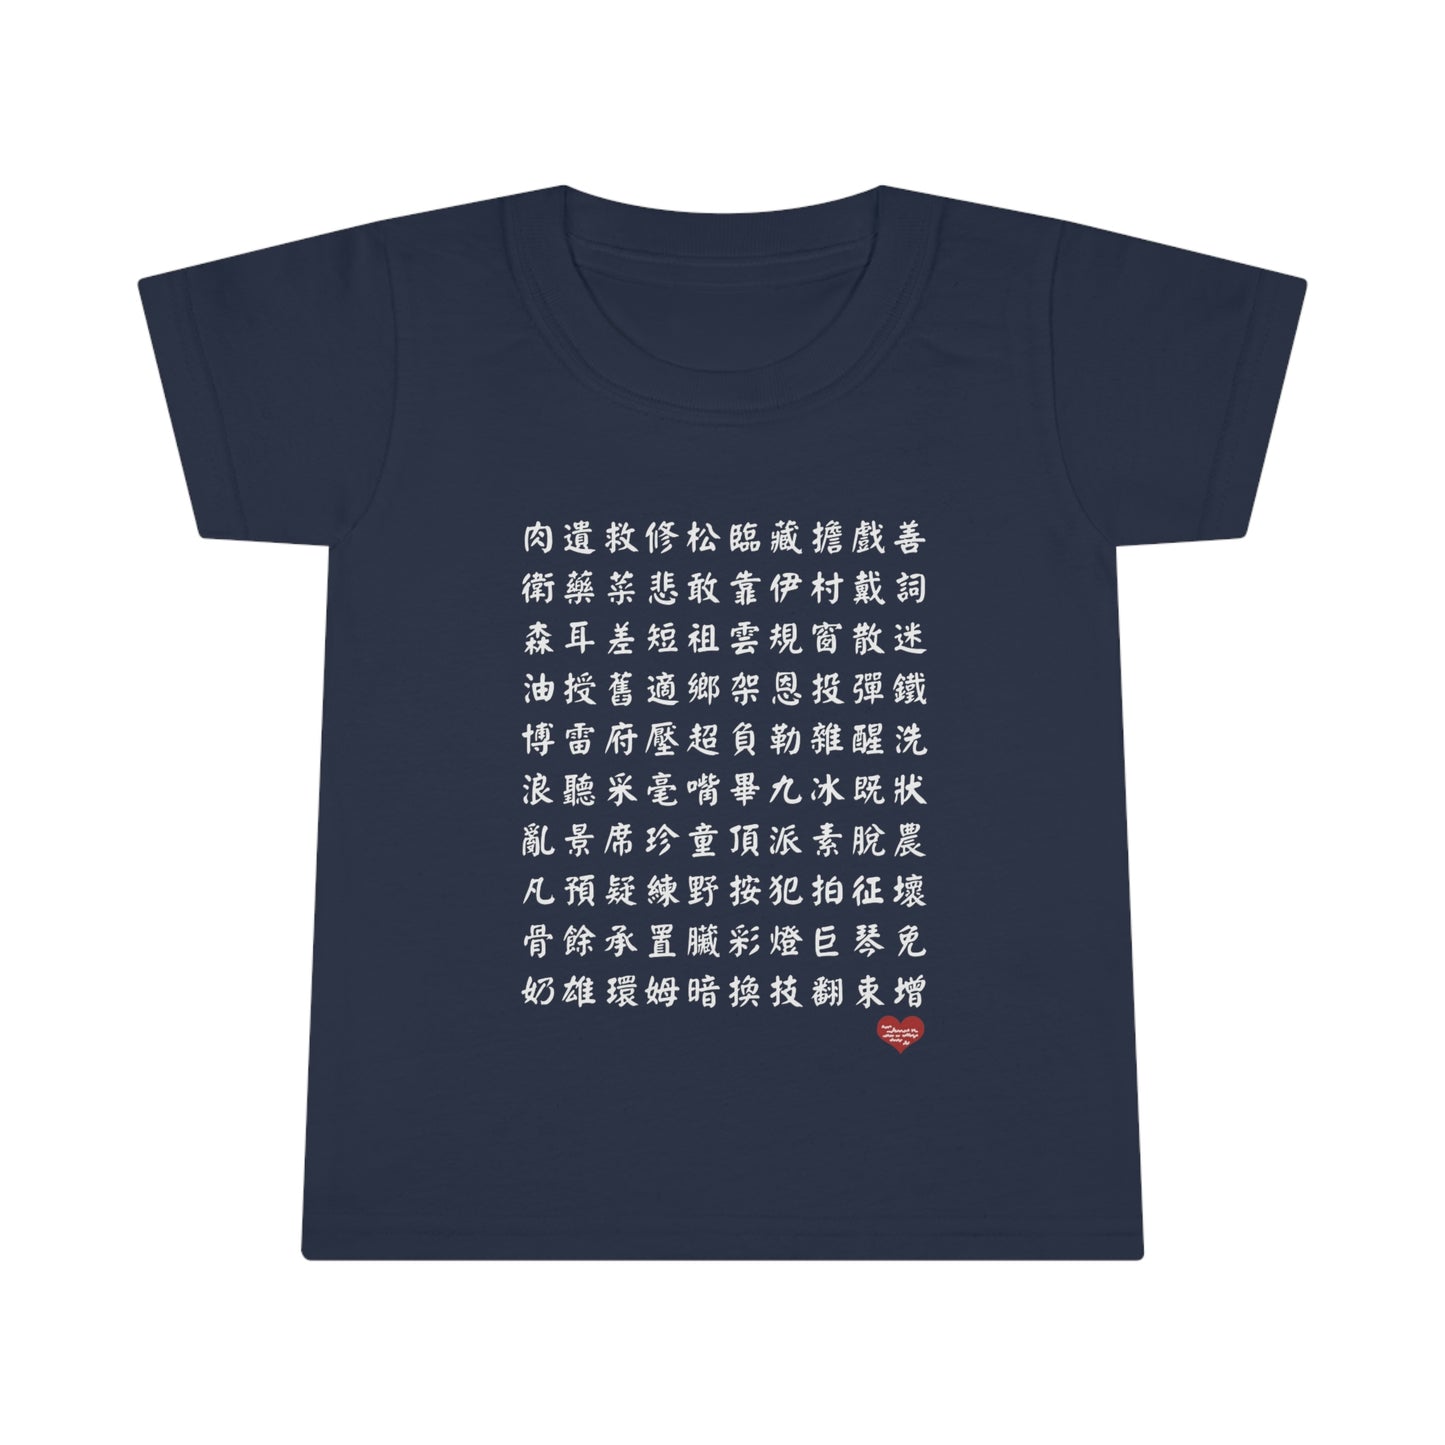 Toddler 1000 Characters Set 9,  1000漢字系列 #9 Color Block T-shirts